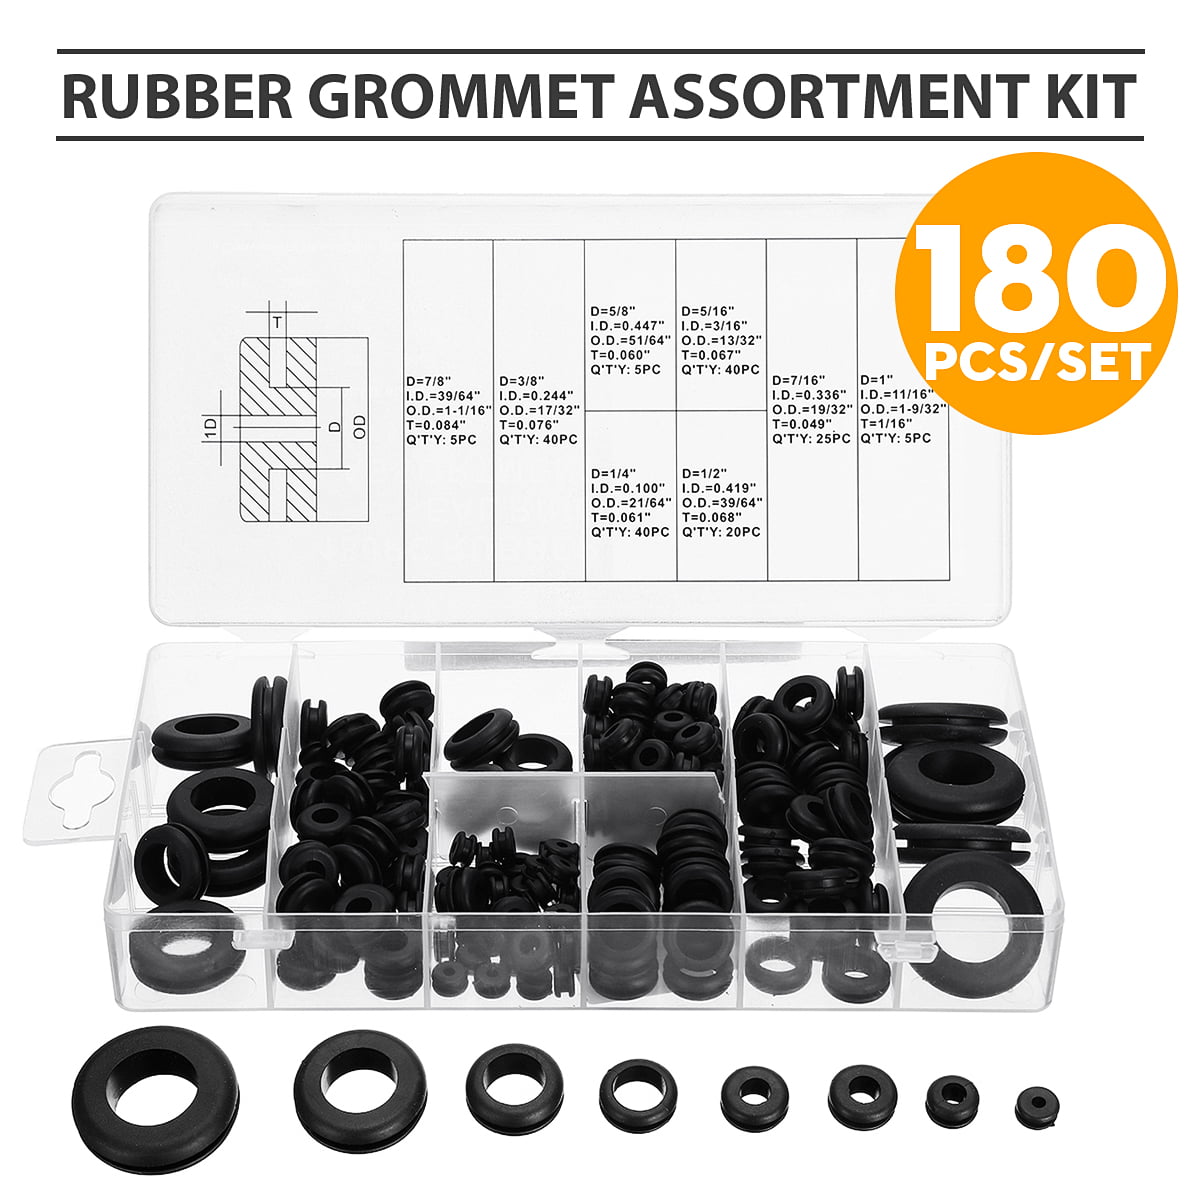 180 PCS Black Rubber Grommet Firewall Hole Plug Set Car Electrical Wire Gasket Ring Grommets Assorted Kit with Box OFNMY Rubber Grommet Assortment Kit 8 Sizes